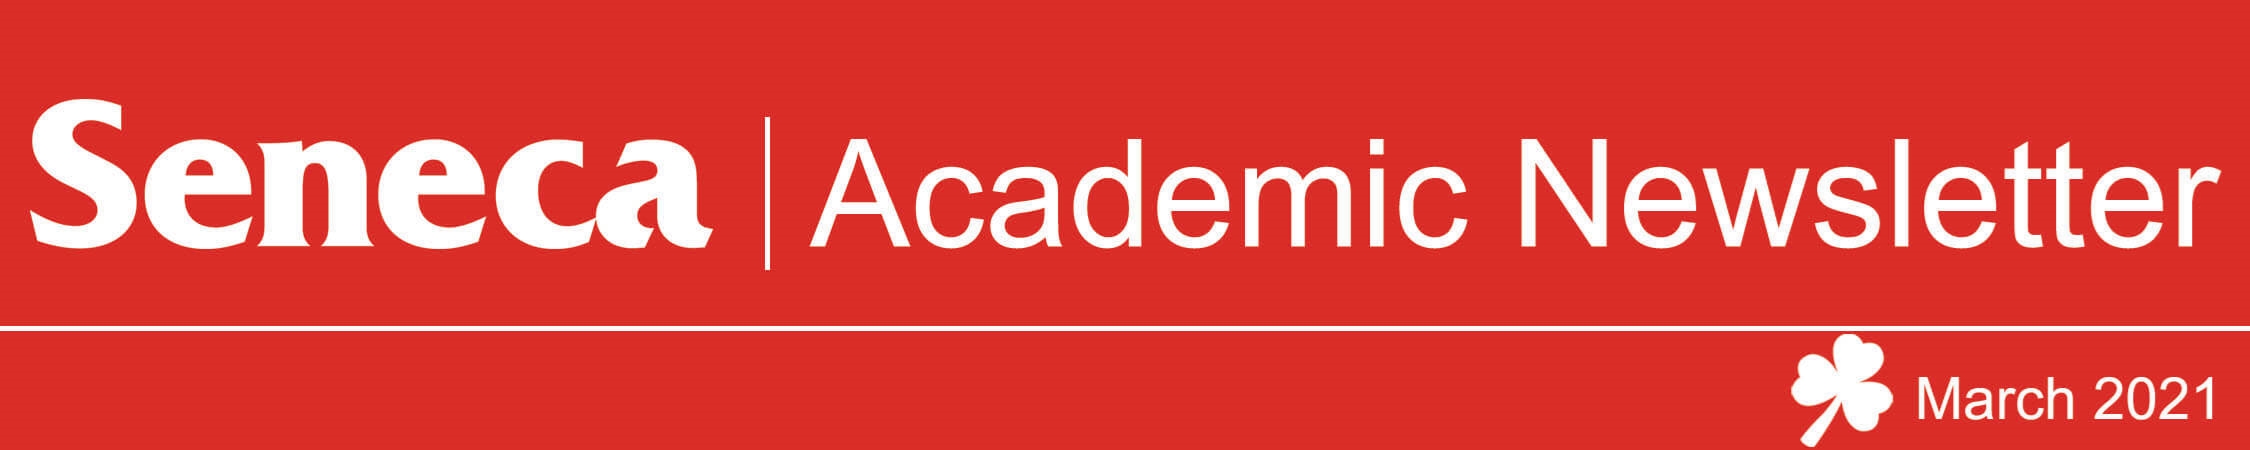 The header logo for the March 2021 issue of the Academic Newsletter